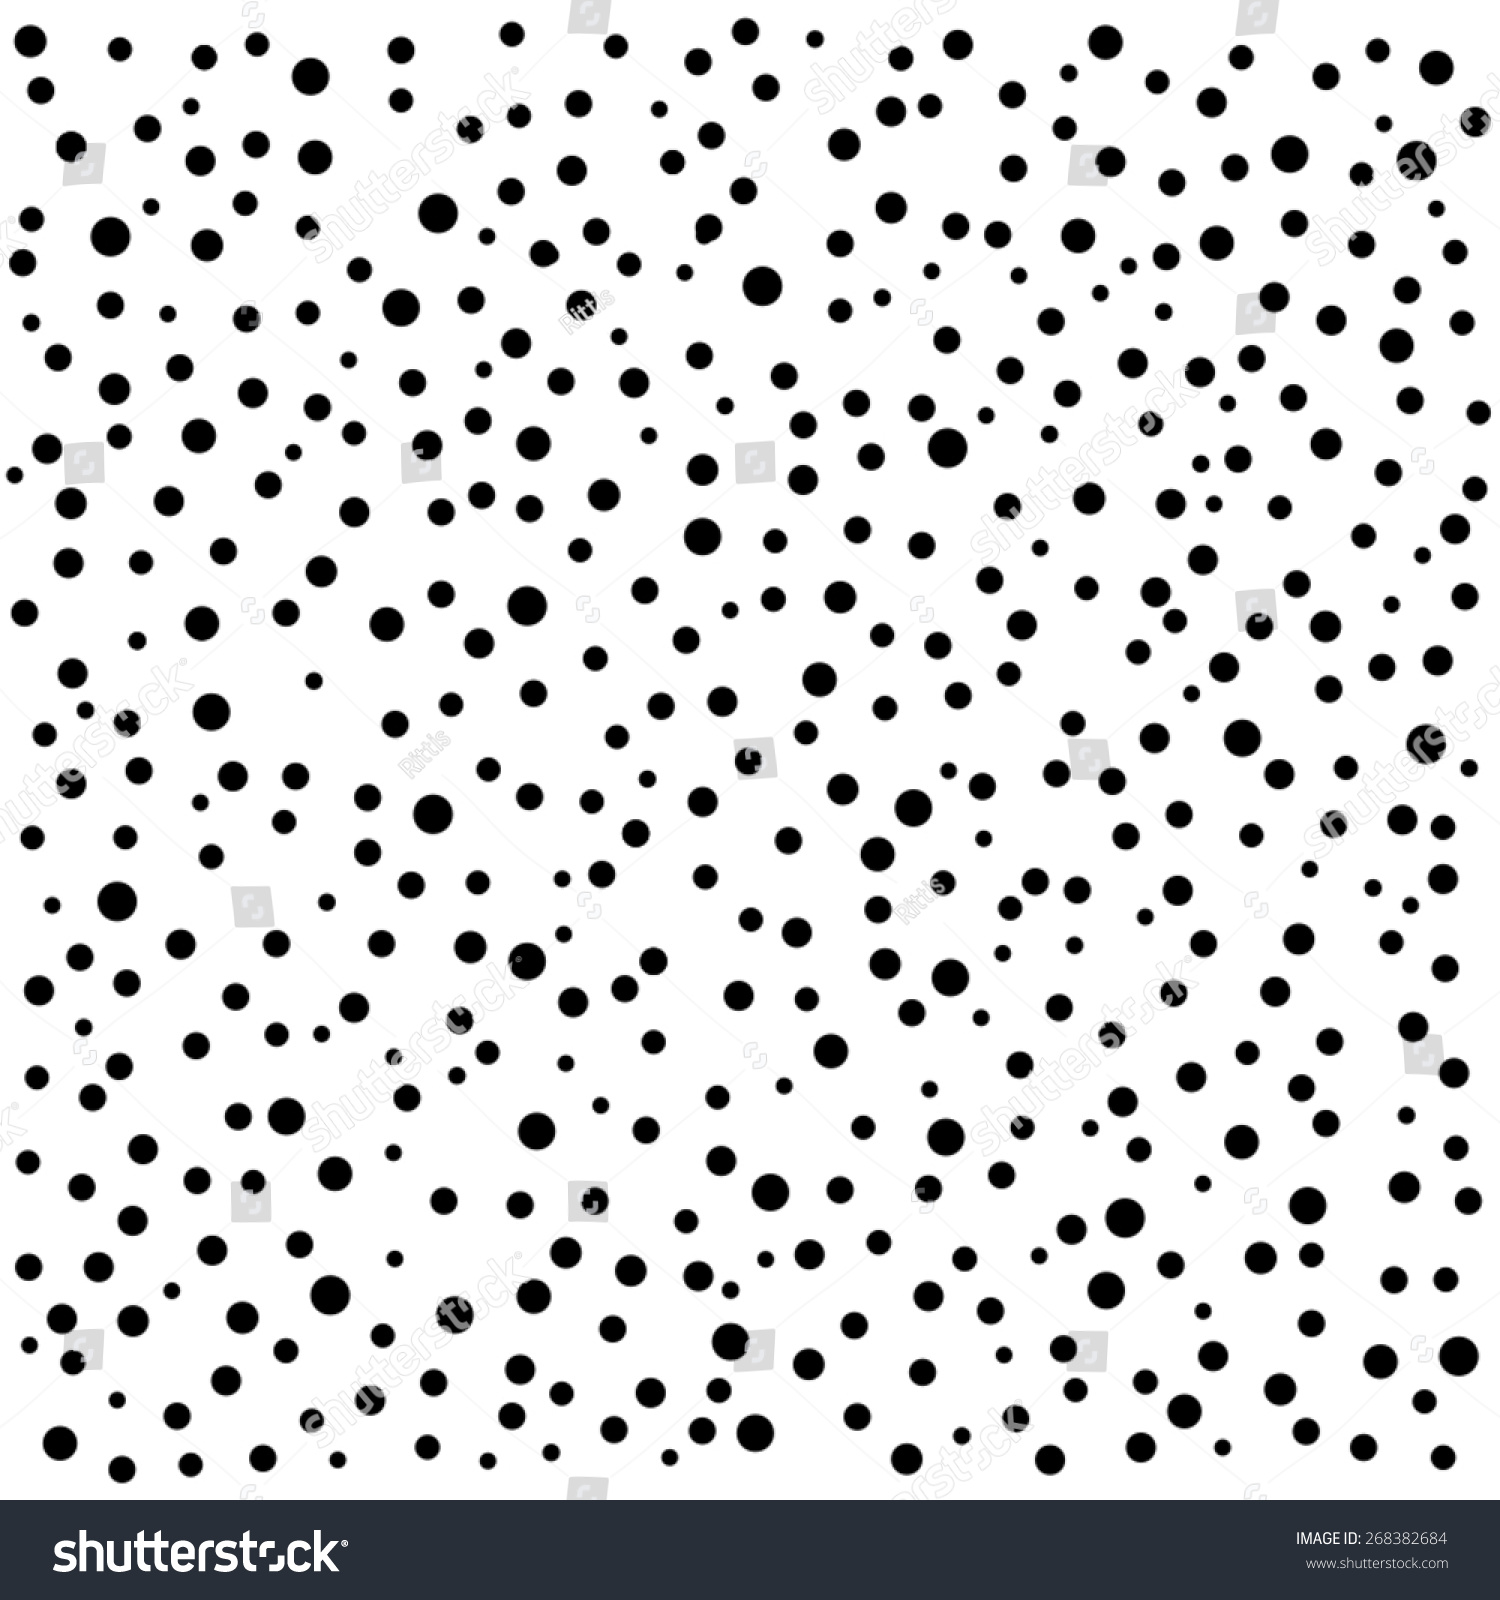 Dotted background pattern photo